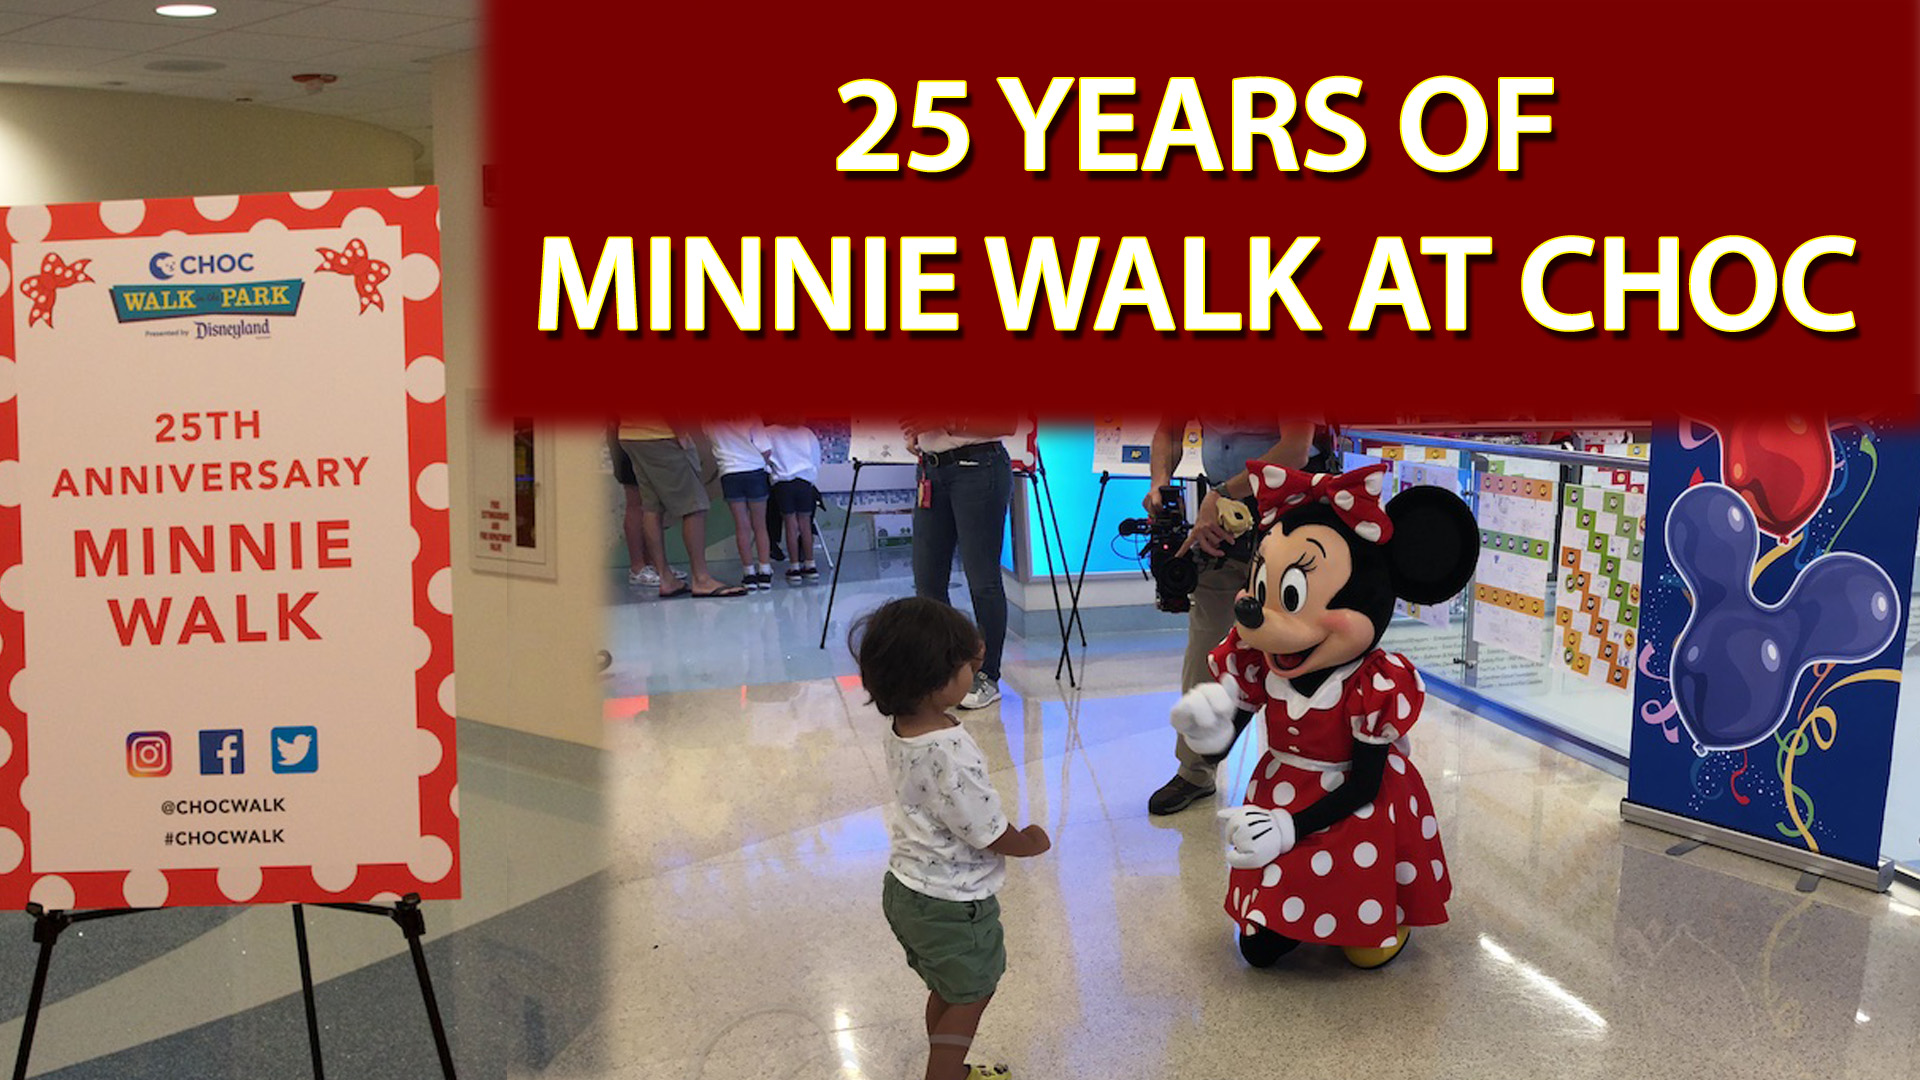 See How the Minnie Walk Has Brought Smiles to Kids at CHOC For 25 Years